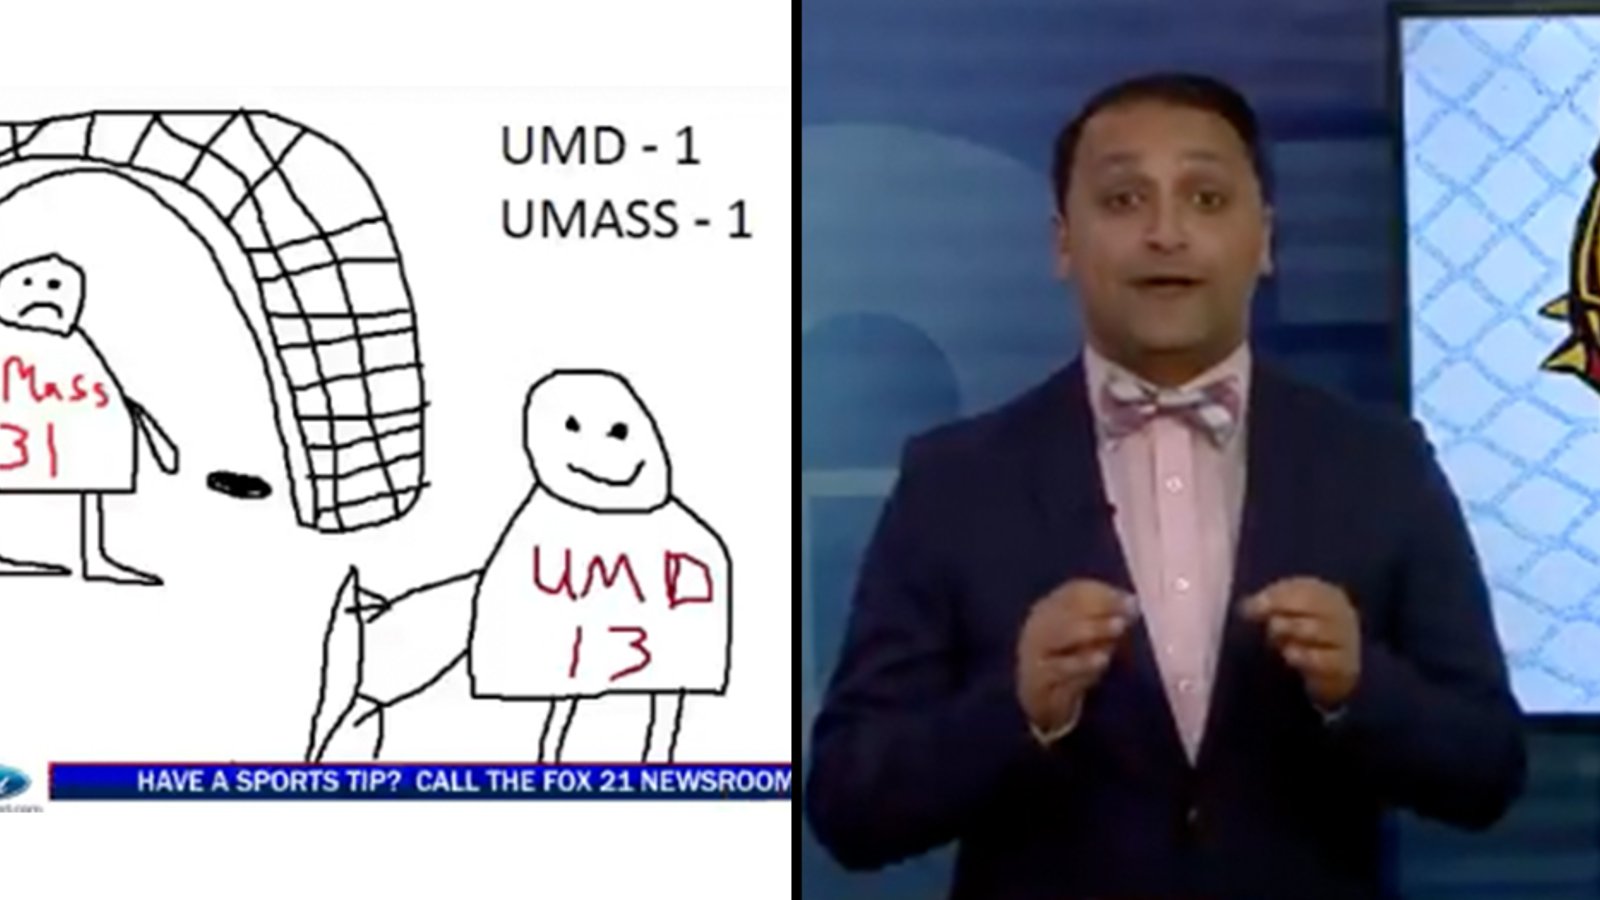 Due to ridiculous NCAA rules, sportscaster forced to use MS Paint for hilarious highlight package